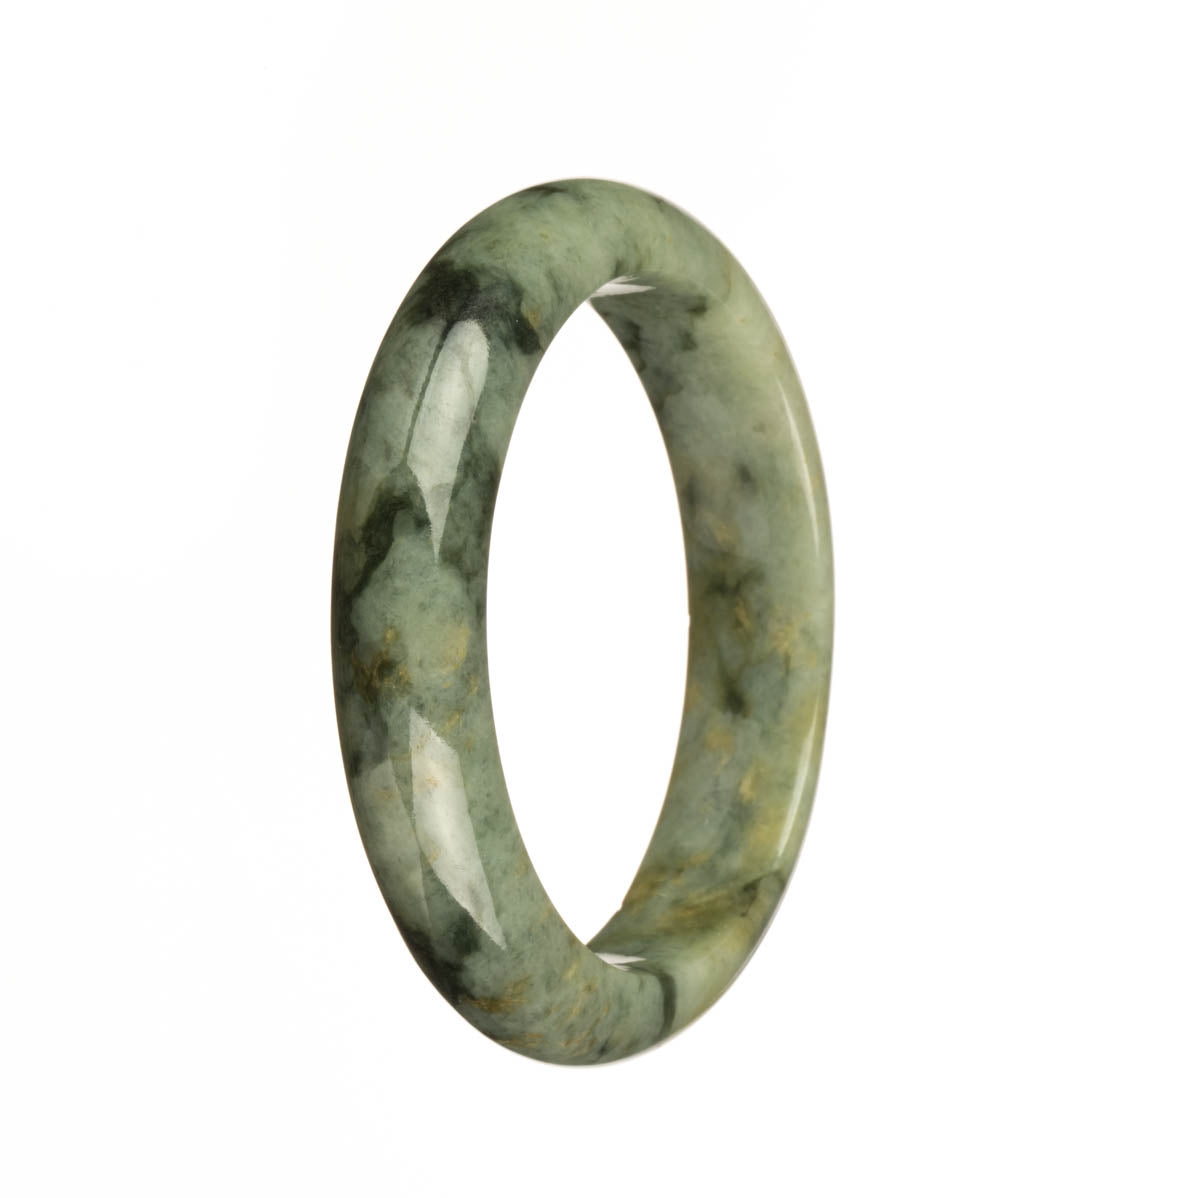 Real Grade A Green with Yellow and Green Patterns Jade Bracelet - 55mm Half Moon